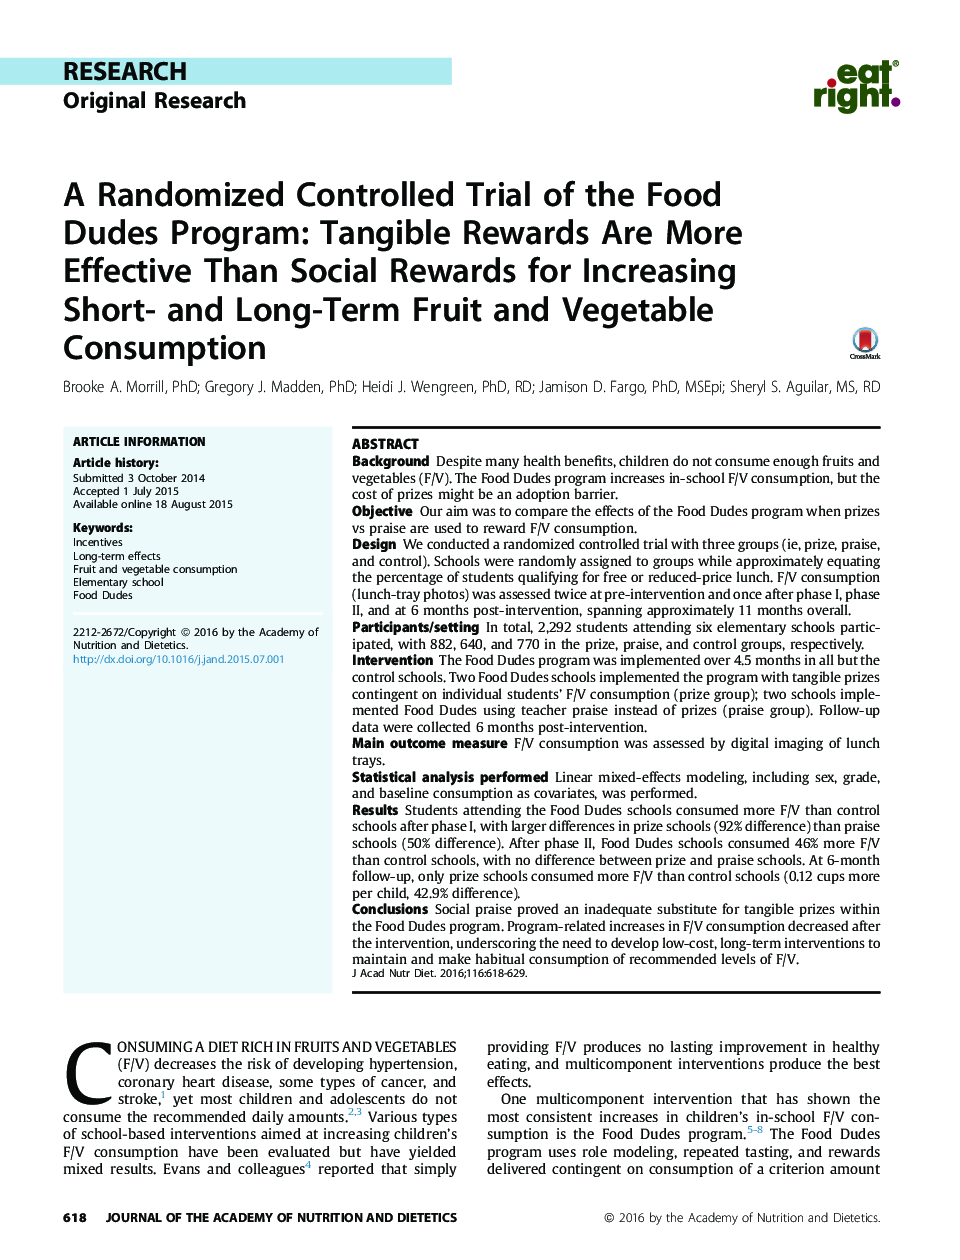 ResearchOriginal ResearchA Randomized Controlled Trial of the Food Dudes Program: Tangible Rewards Are More Effective Than Social Rewards for Increasing Short- and Long-Term Fruit and Vegetable Consumption